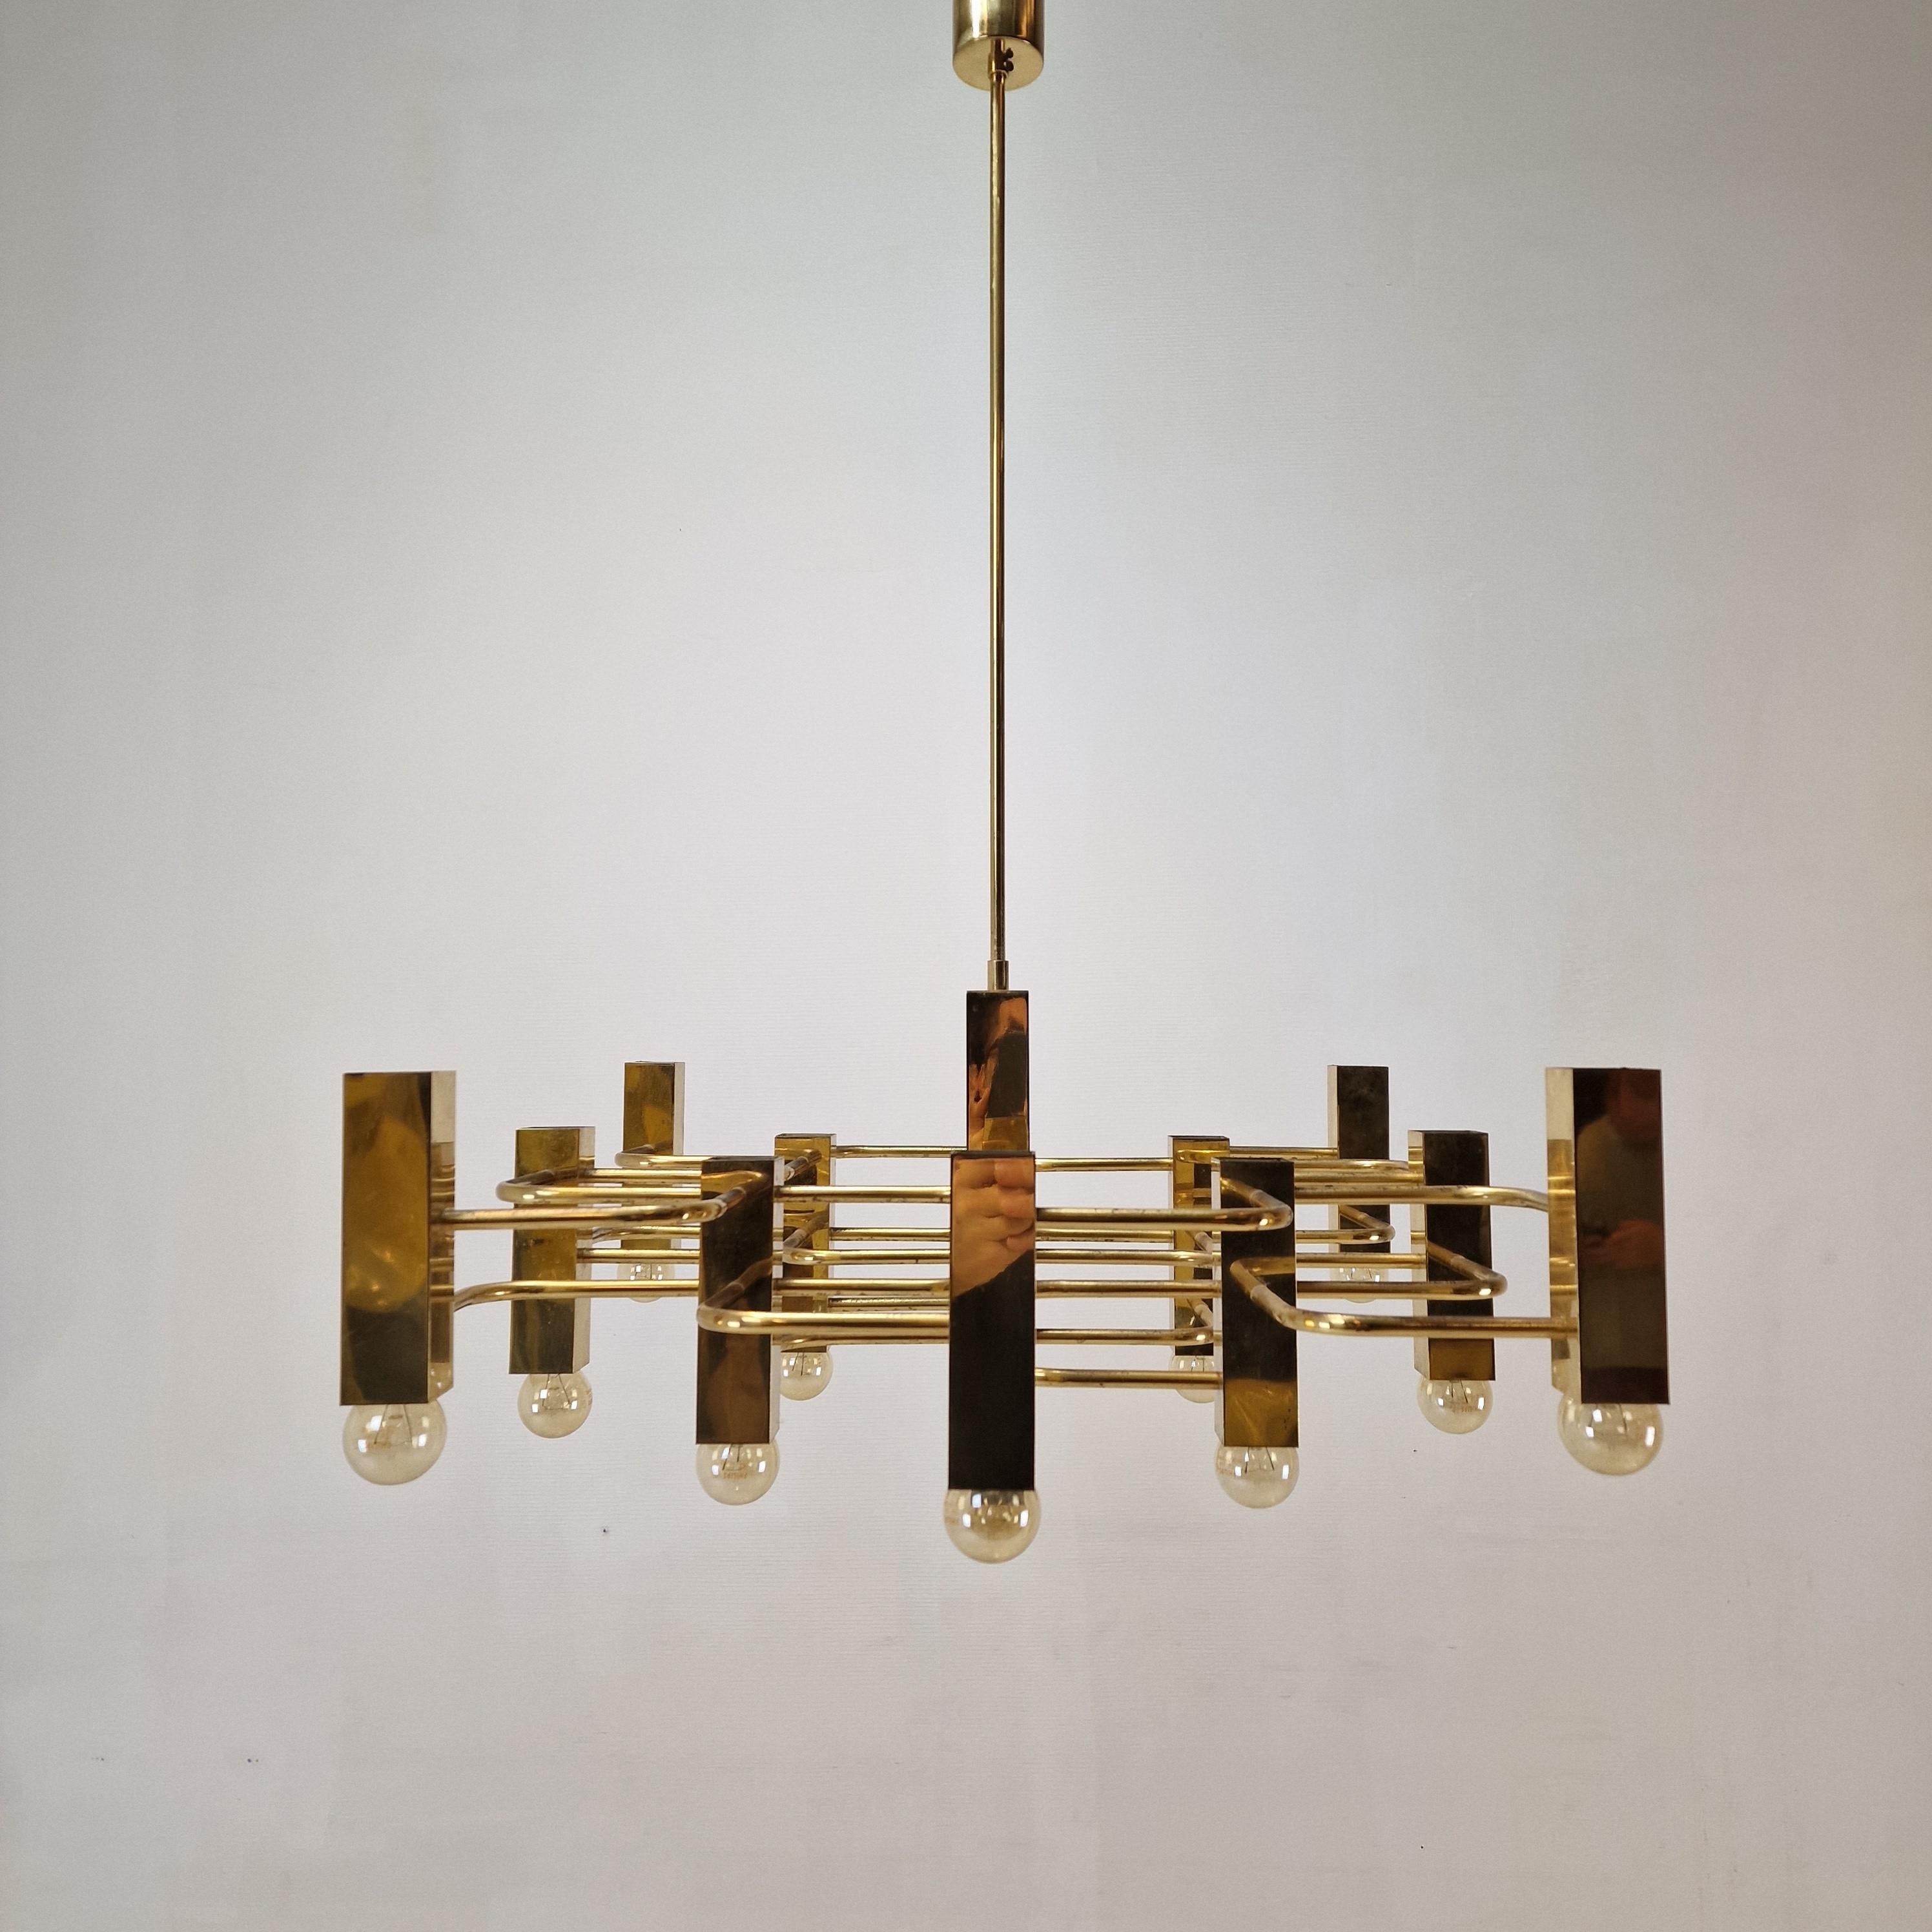 Beautiful Italian pendant fabricated by Sciolari in the 1970s.

The thirteen lights combined with the elegant brass arms makes this lamp a stunning piece.

Good vintage condition, some traces of use.  
The wiring has been checked by a professional